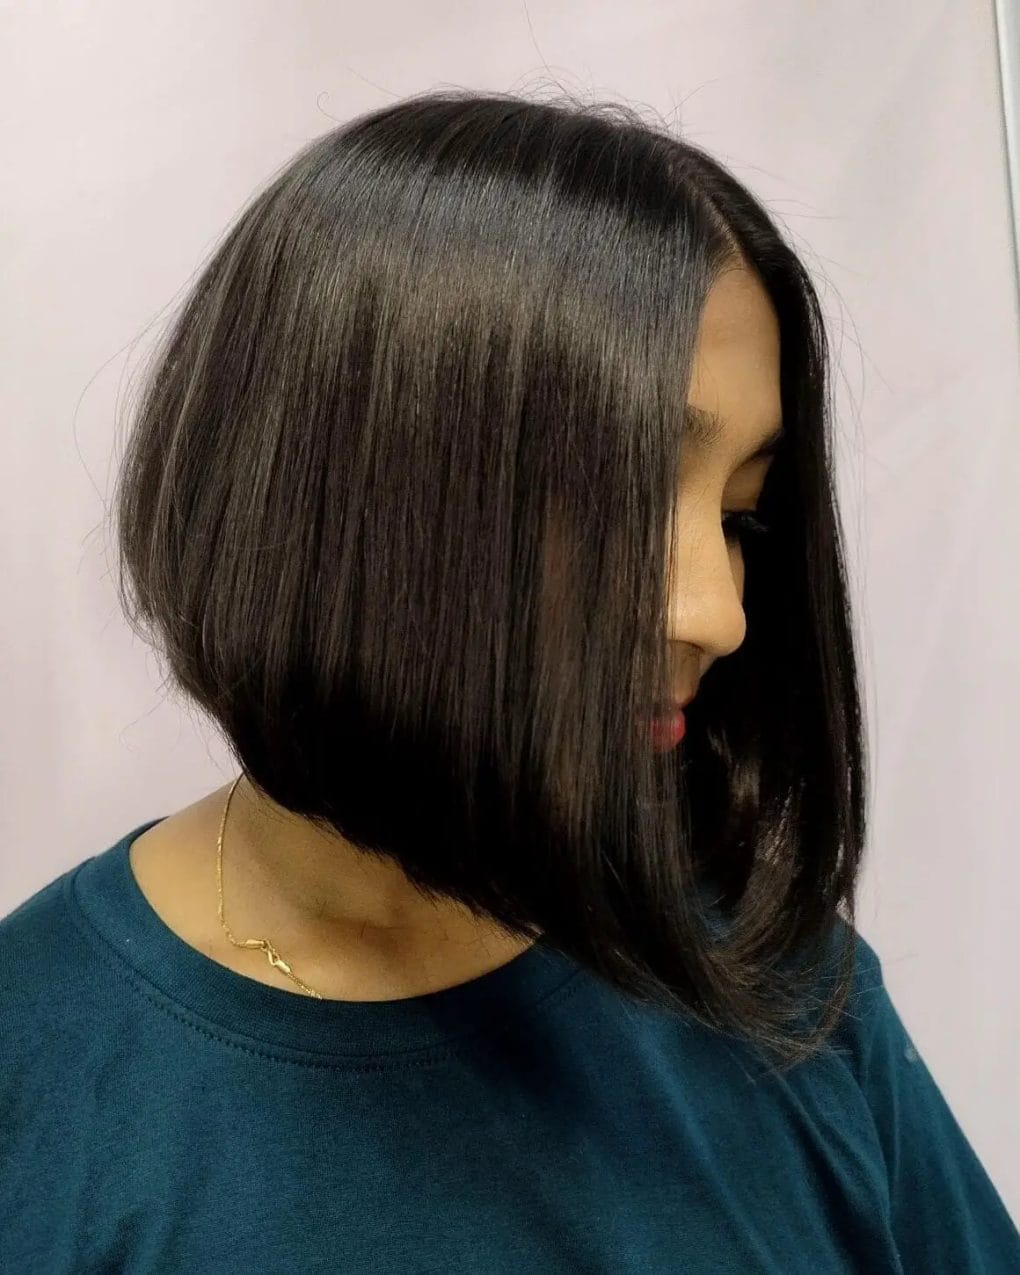 Sleek graduated bob with a glossy dark finish and precise styling.